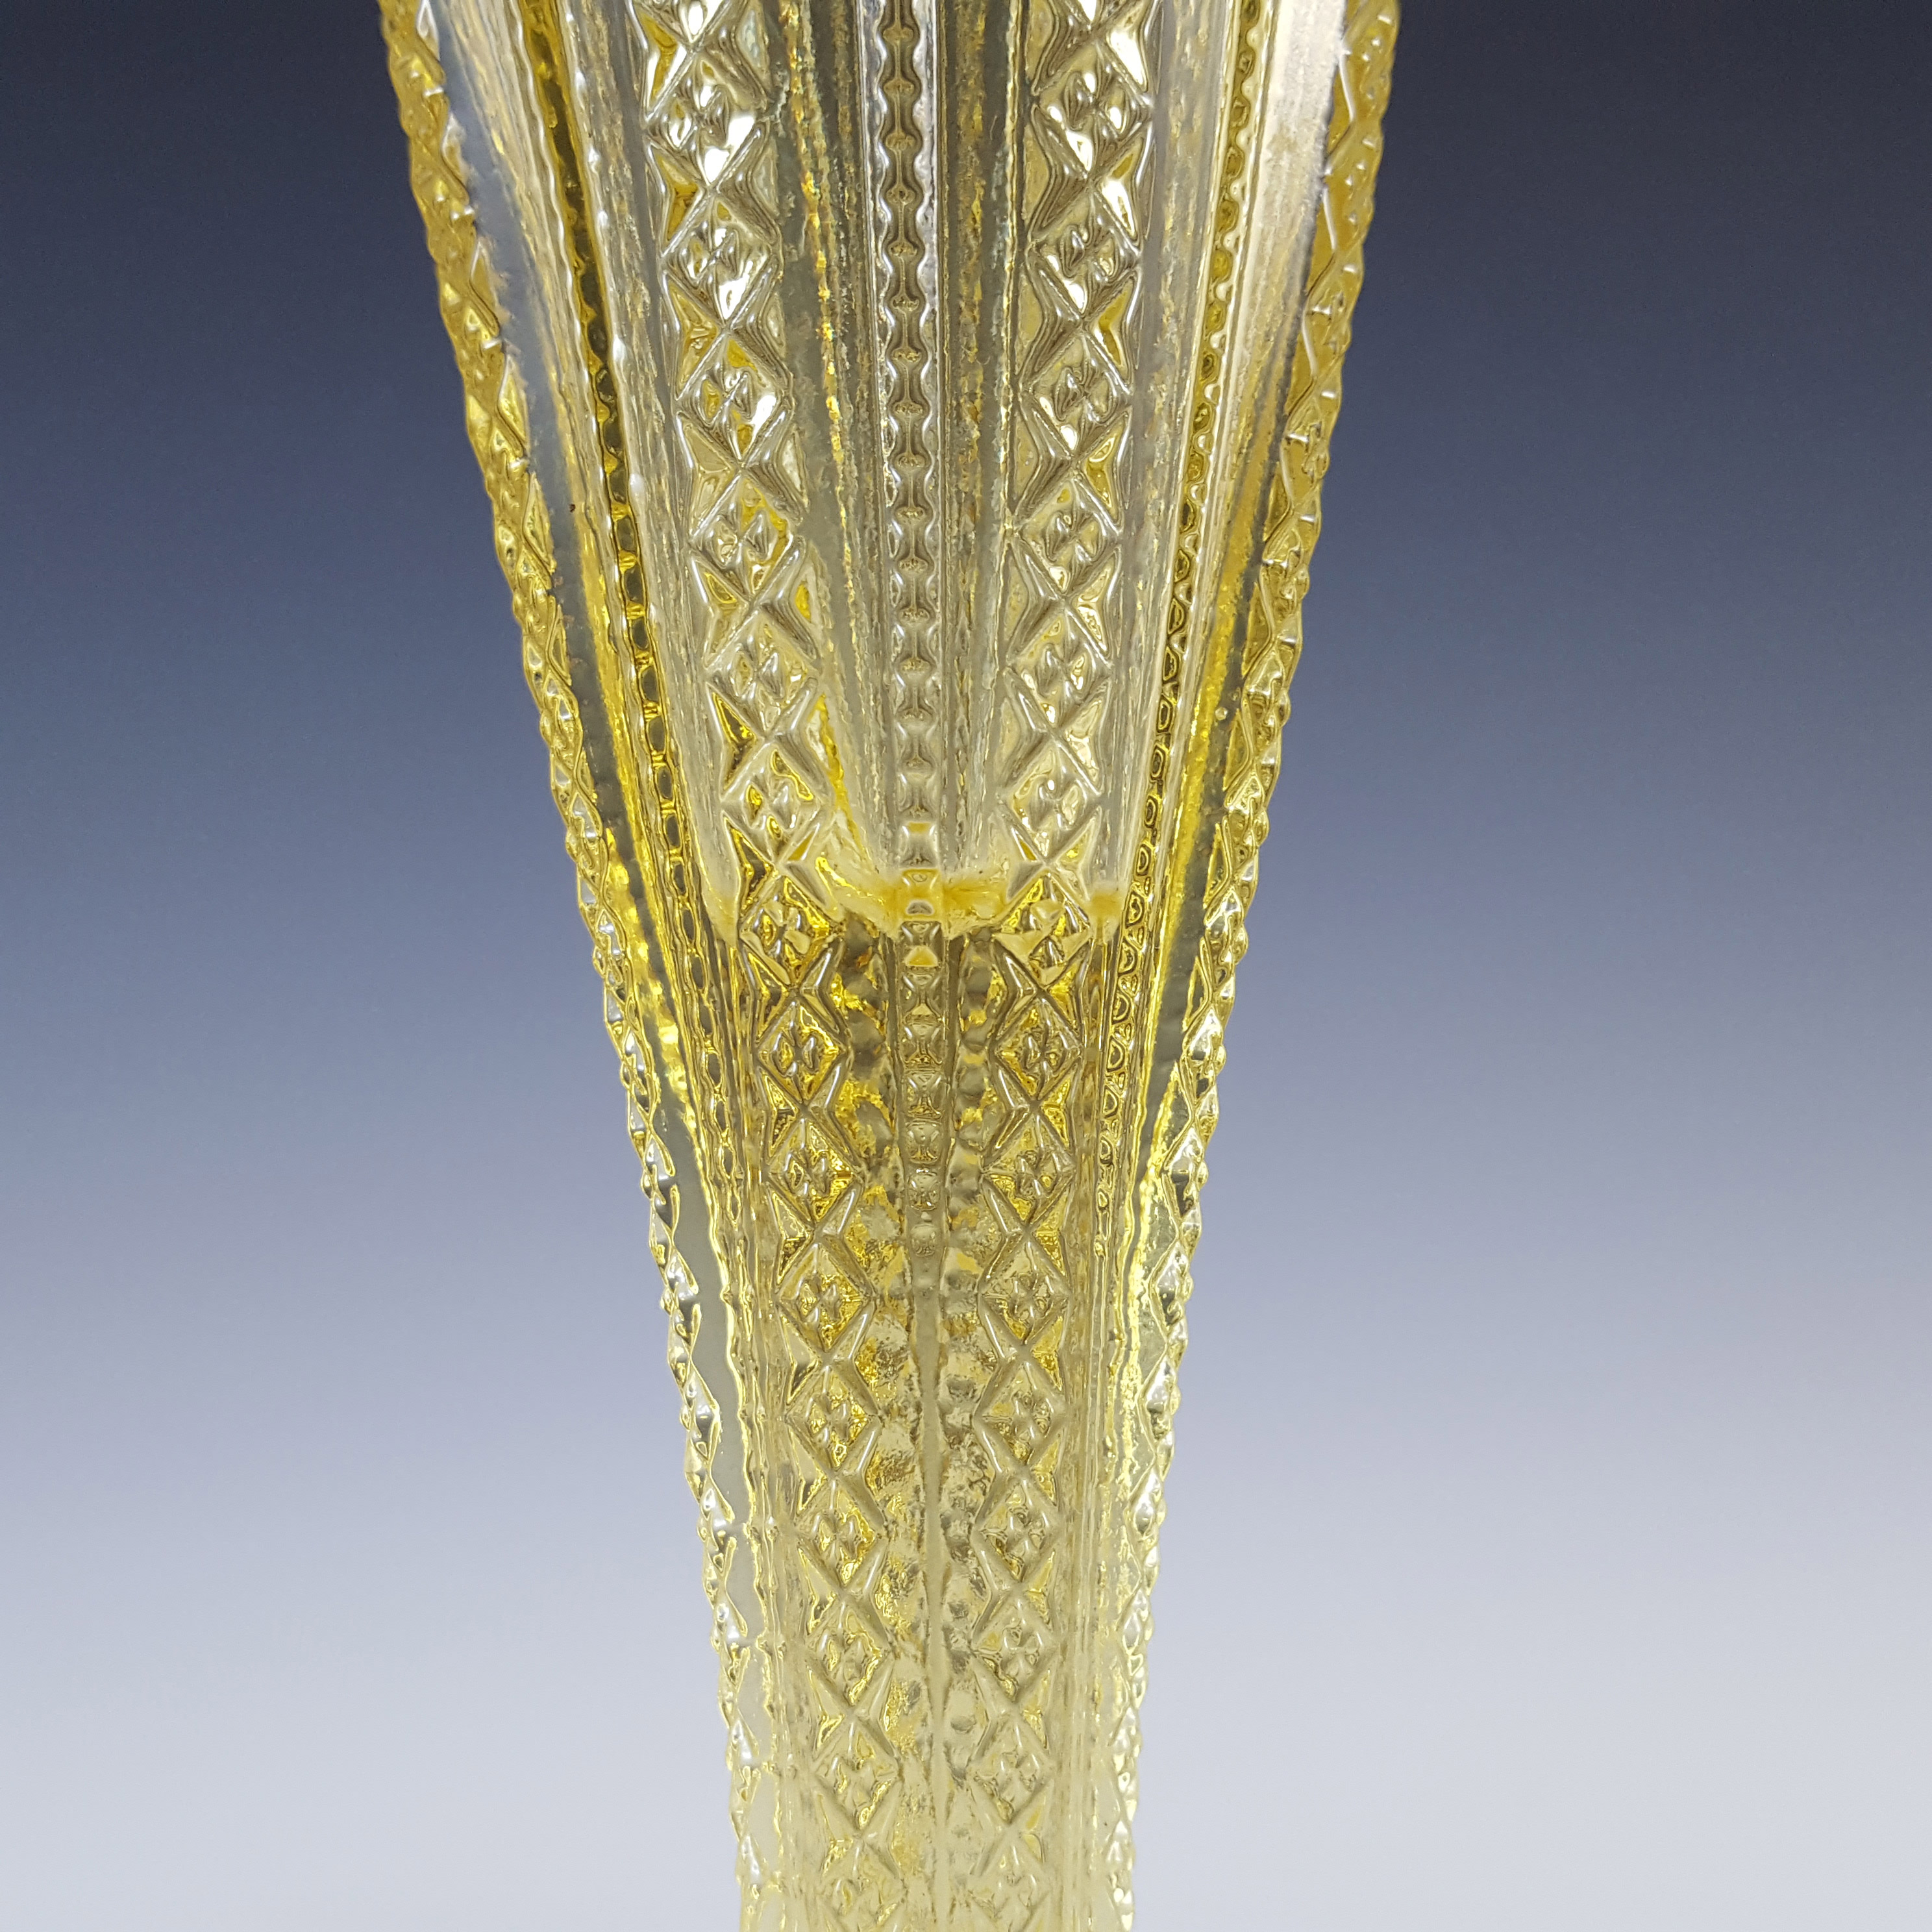 Tiara Glass Vintage Yellow 'Ribbon' Vase by Indiana Glass - Click Image to Close